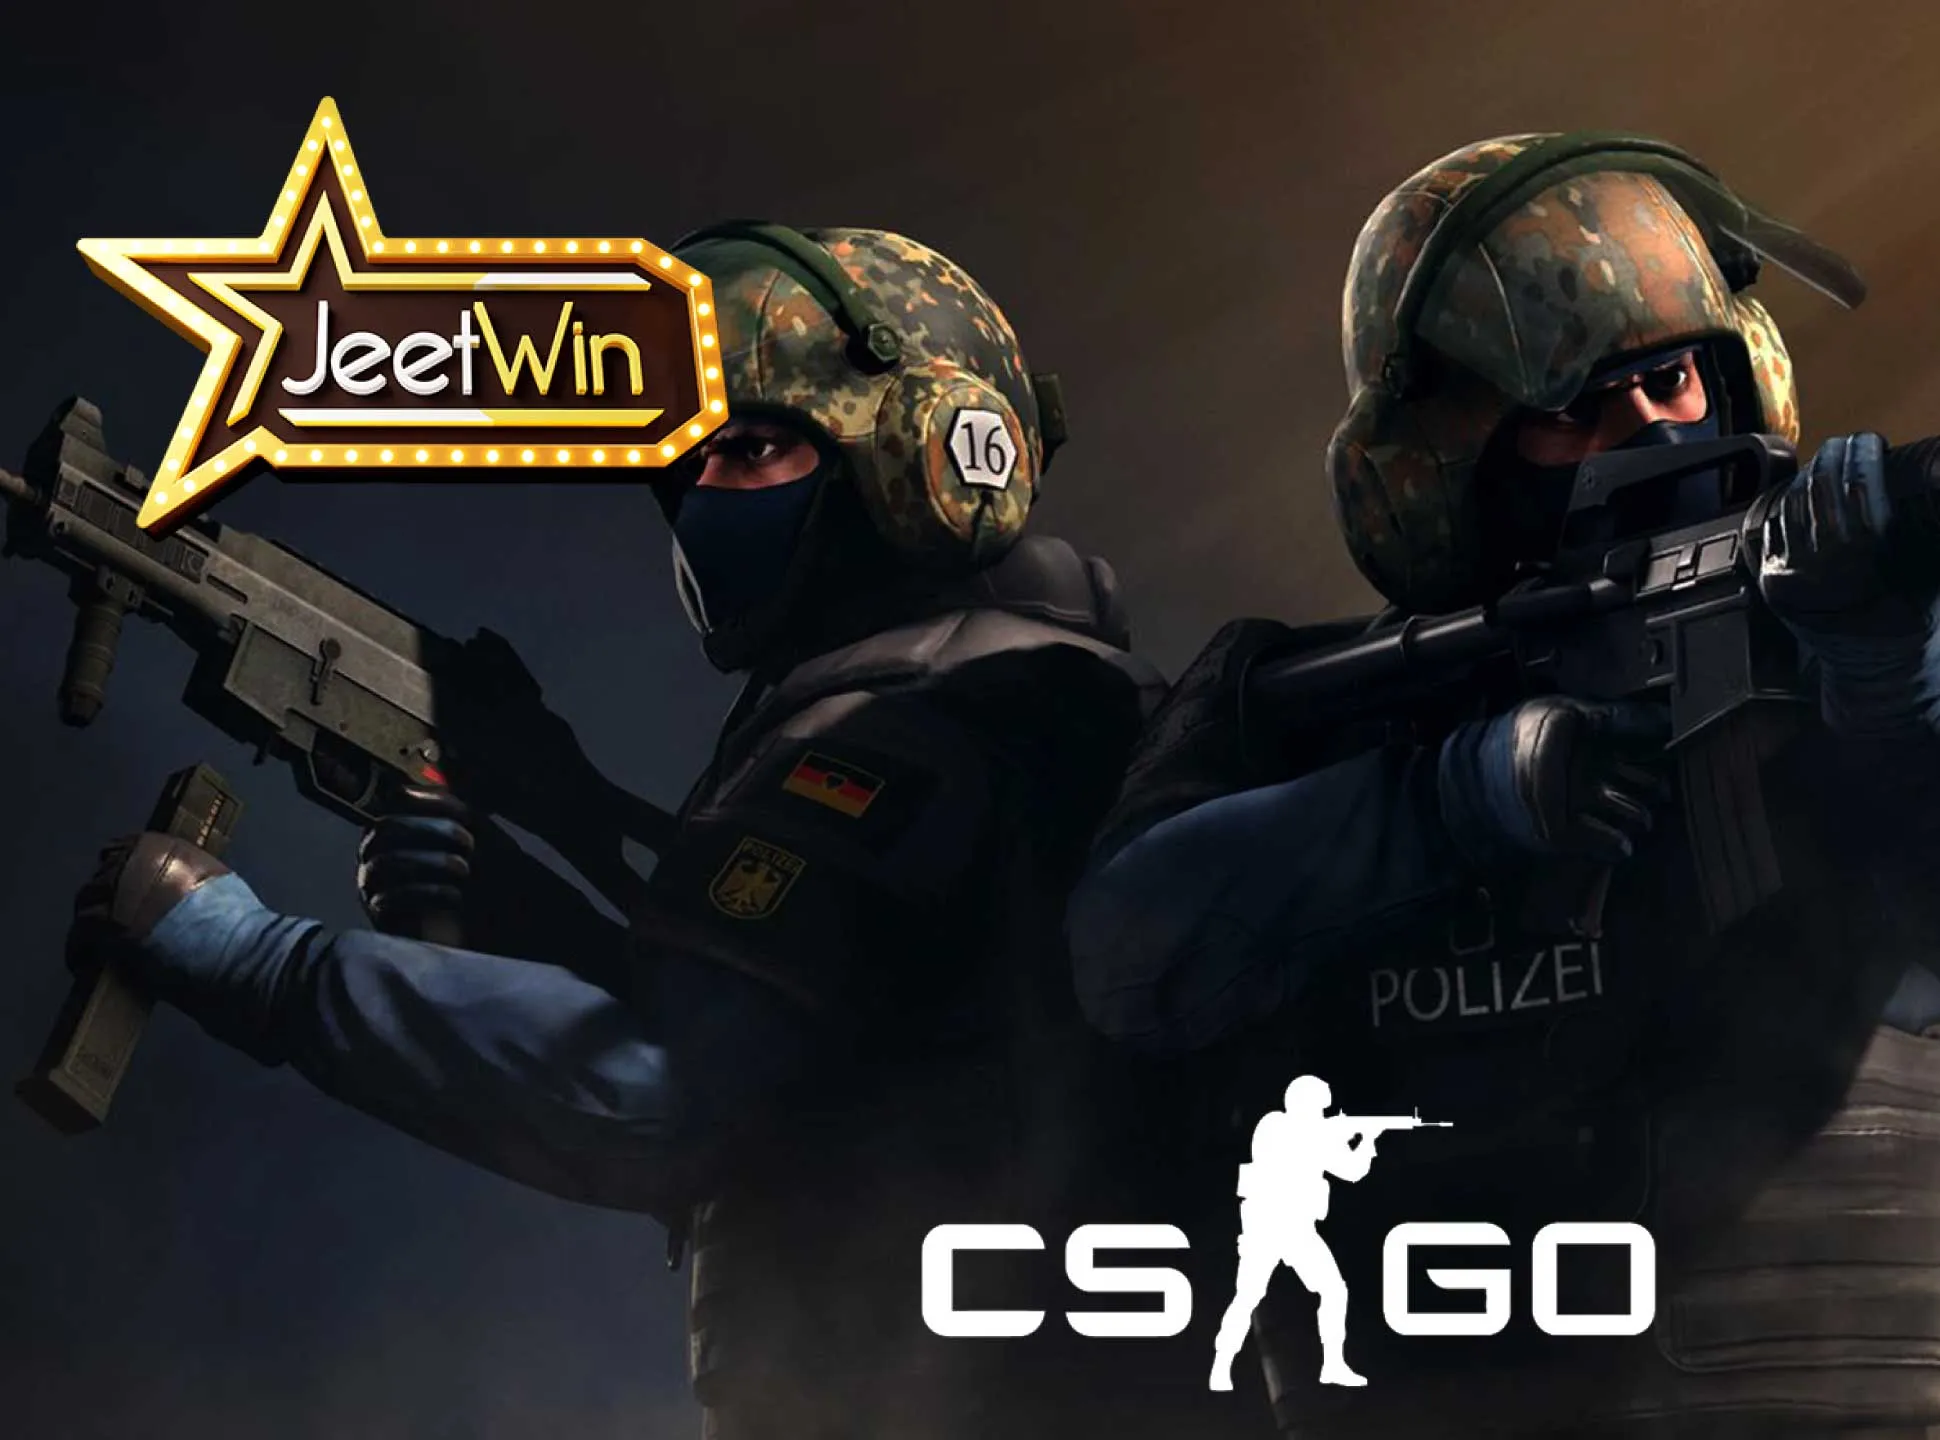 CS:GO is also among the Jeetwin betting opportunities.